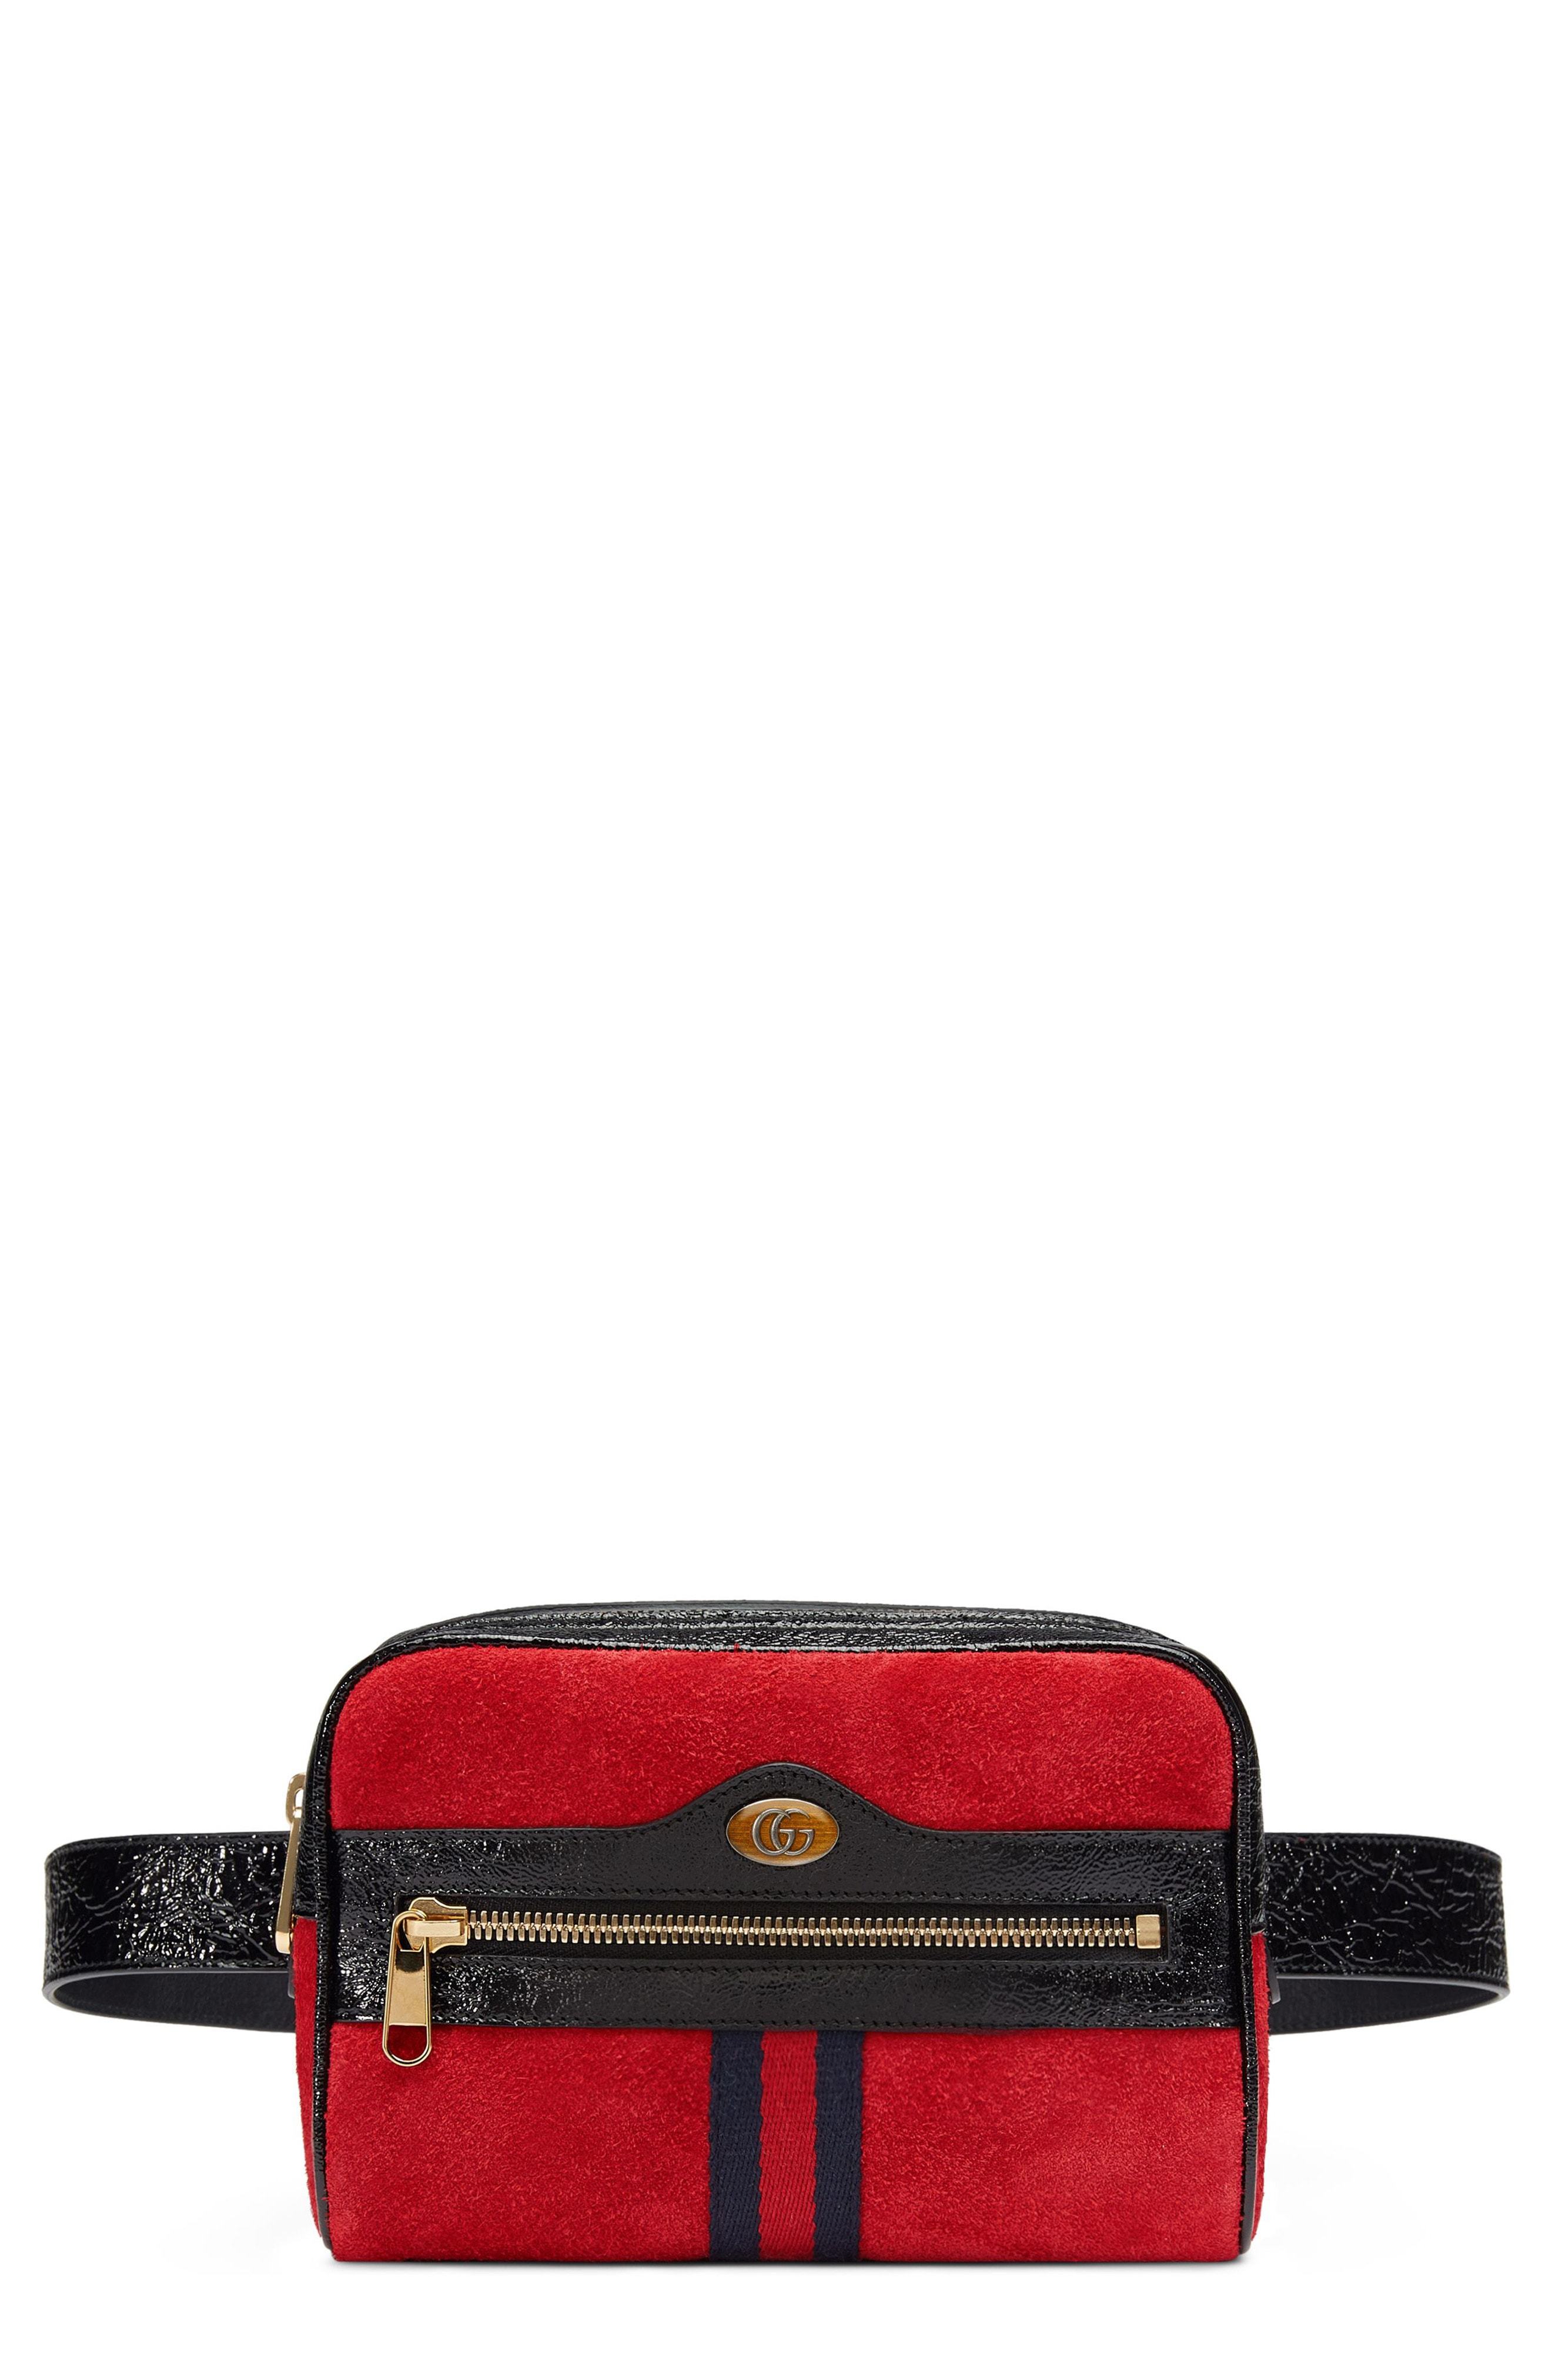 Gucci Ophidia Small Suede Belt Bag, $1 